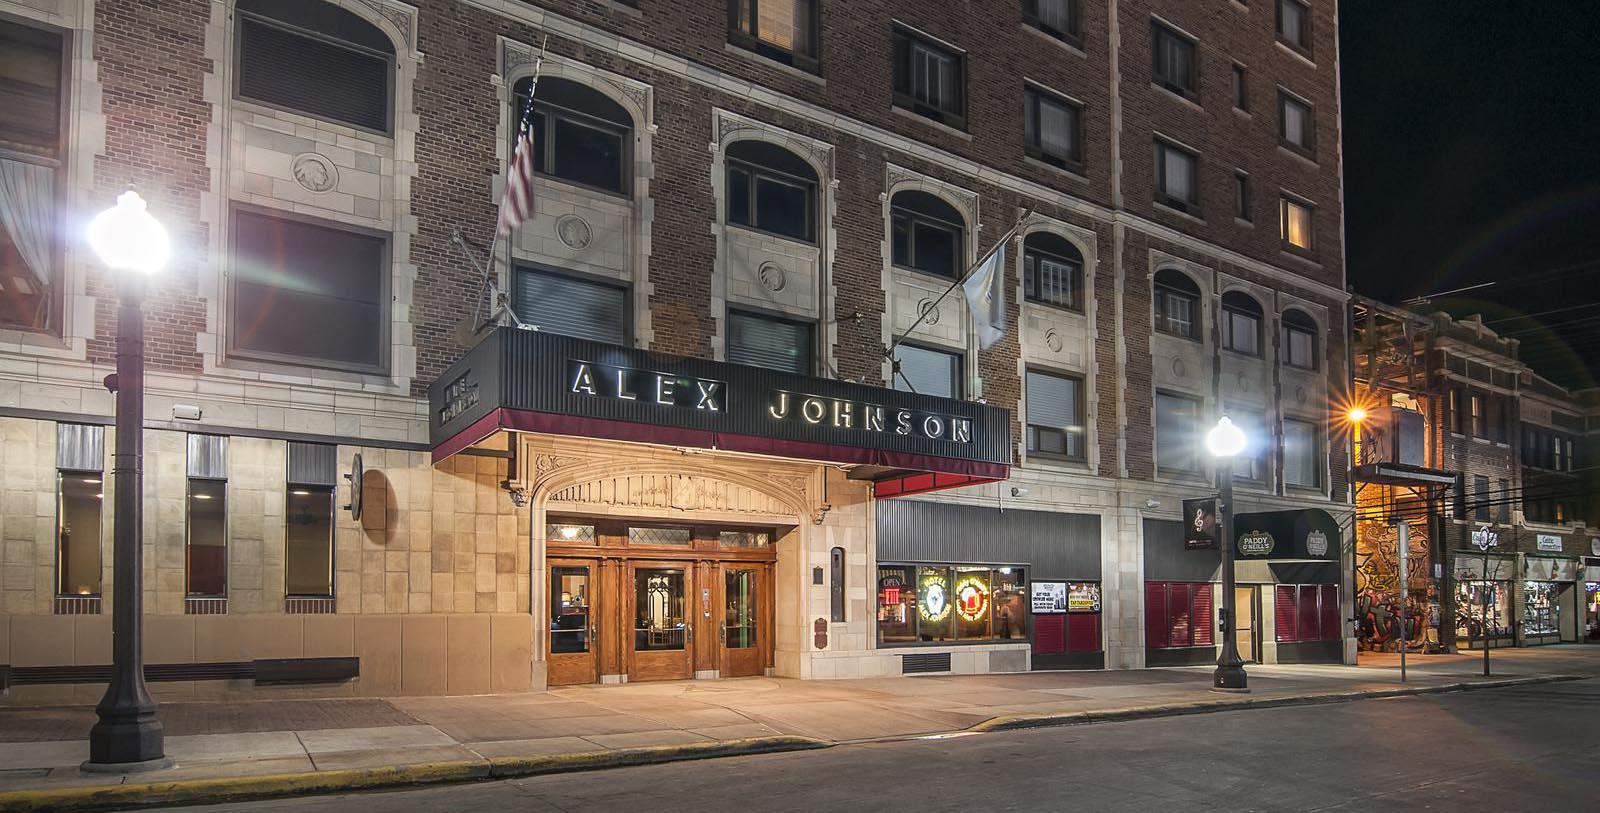 Image of Hotel Exterior, Hotel Alex Johnson in Rapid City, South Dakota, 1928, Member of Historic Hotels of America, Discover